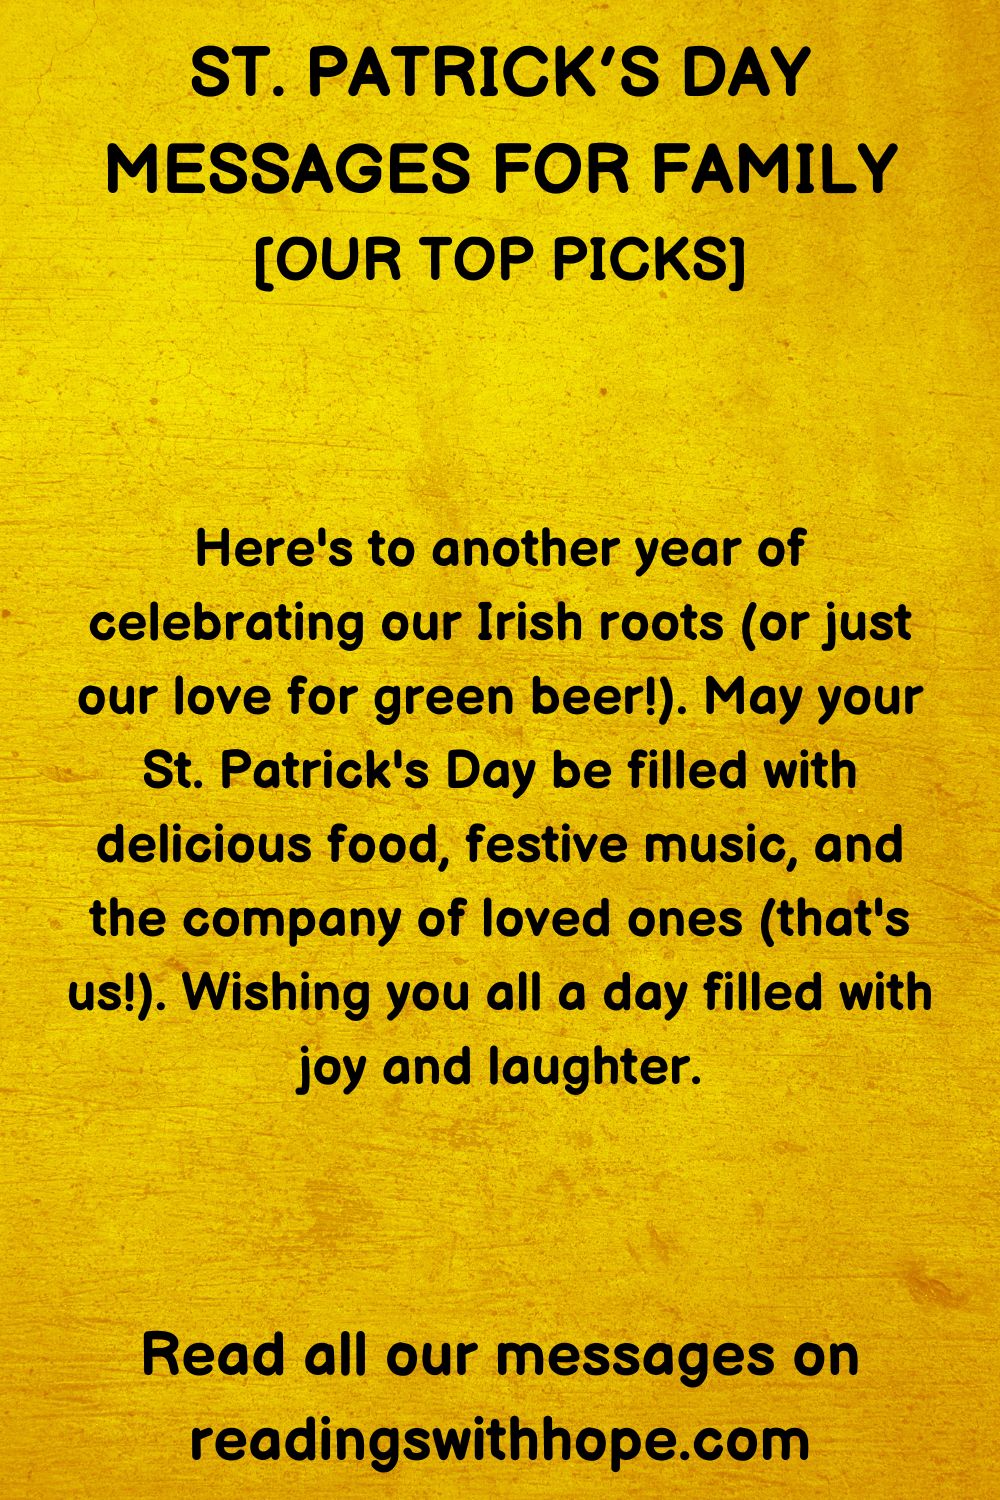 patrick's day message for family